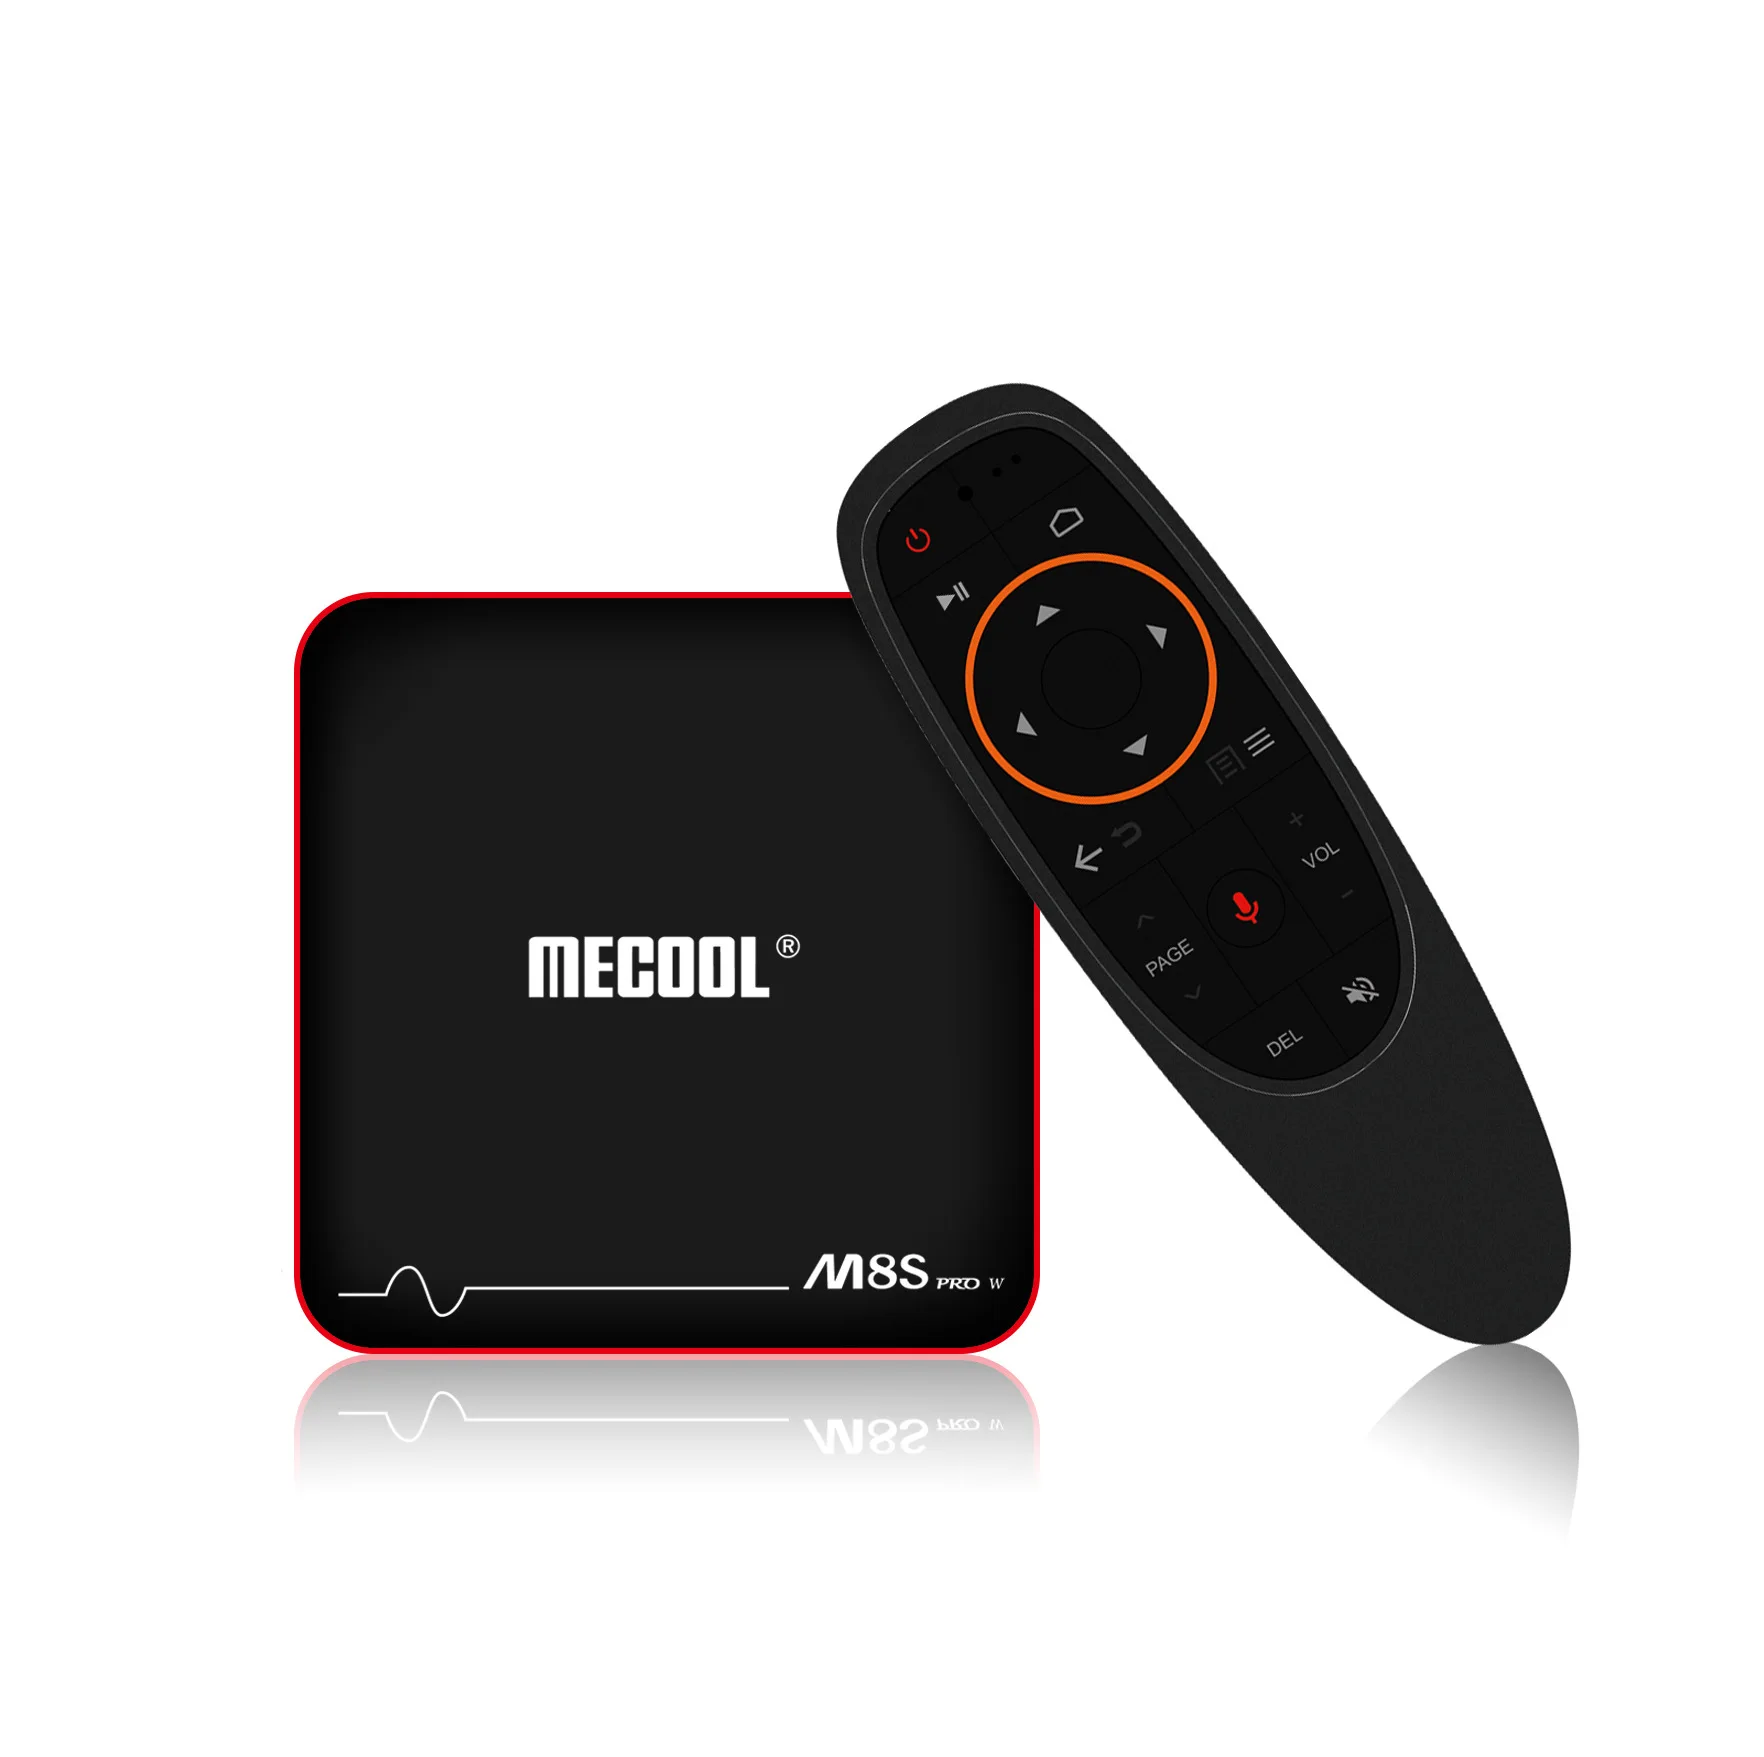 

2018 New m8s PRO W Android 7.1 2GB/16GB Amlogic S905W TV BOX WIFI LAN HDTV Media Player 4K remote control with voice